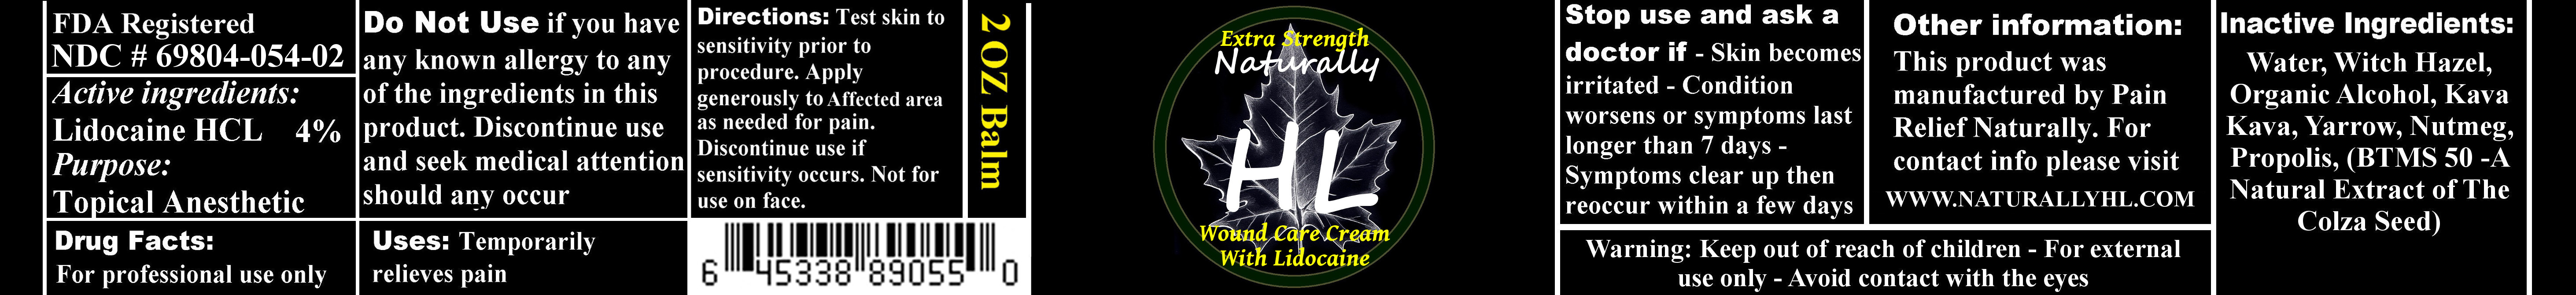 Extra Strength Wound Care | Lidocaine Hcl Cream while Breastfeeding